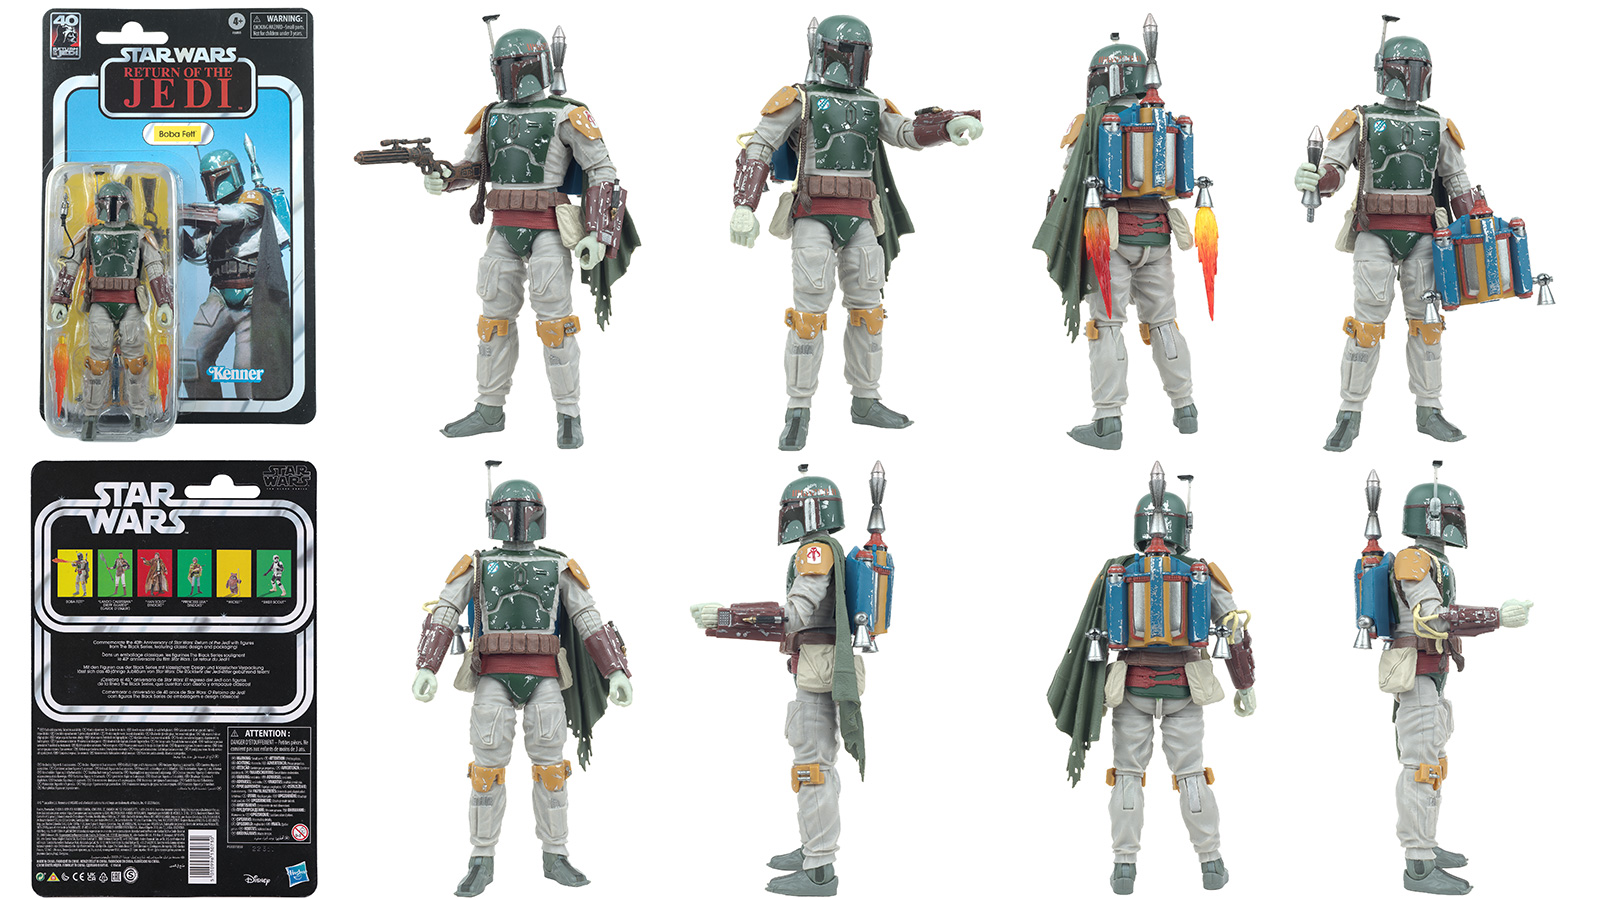 New Photos - The Black Series 40th Anniversary 6-Inch Deluxe Boba Fett